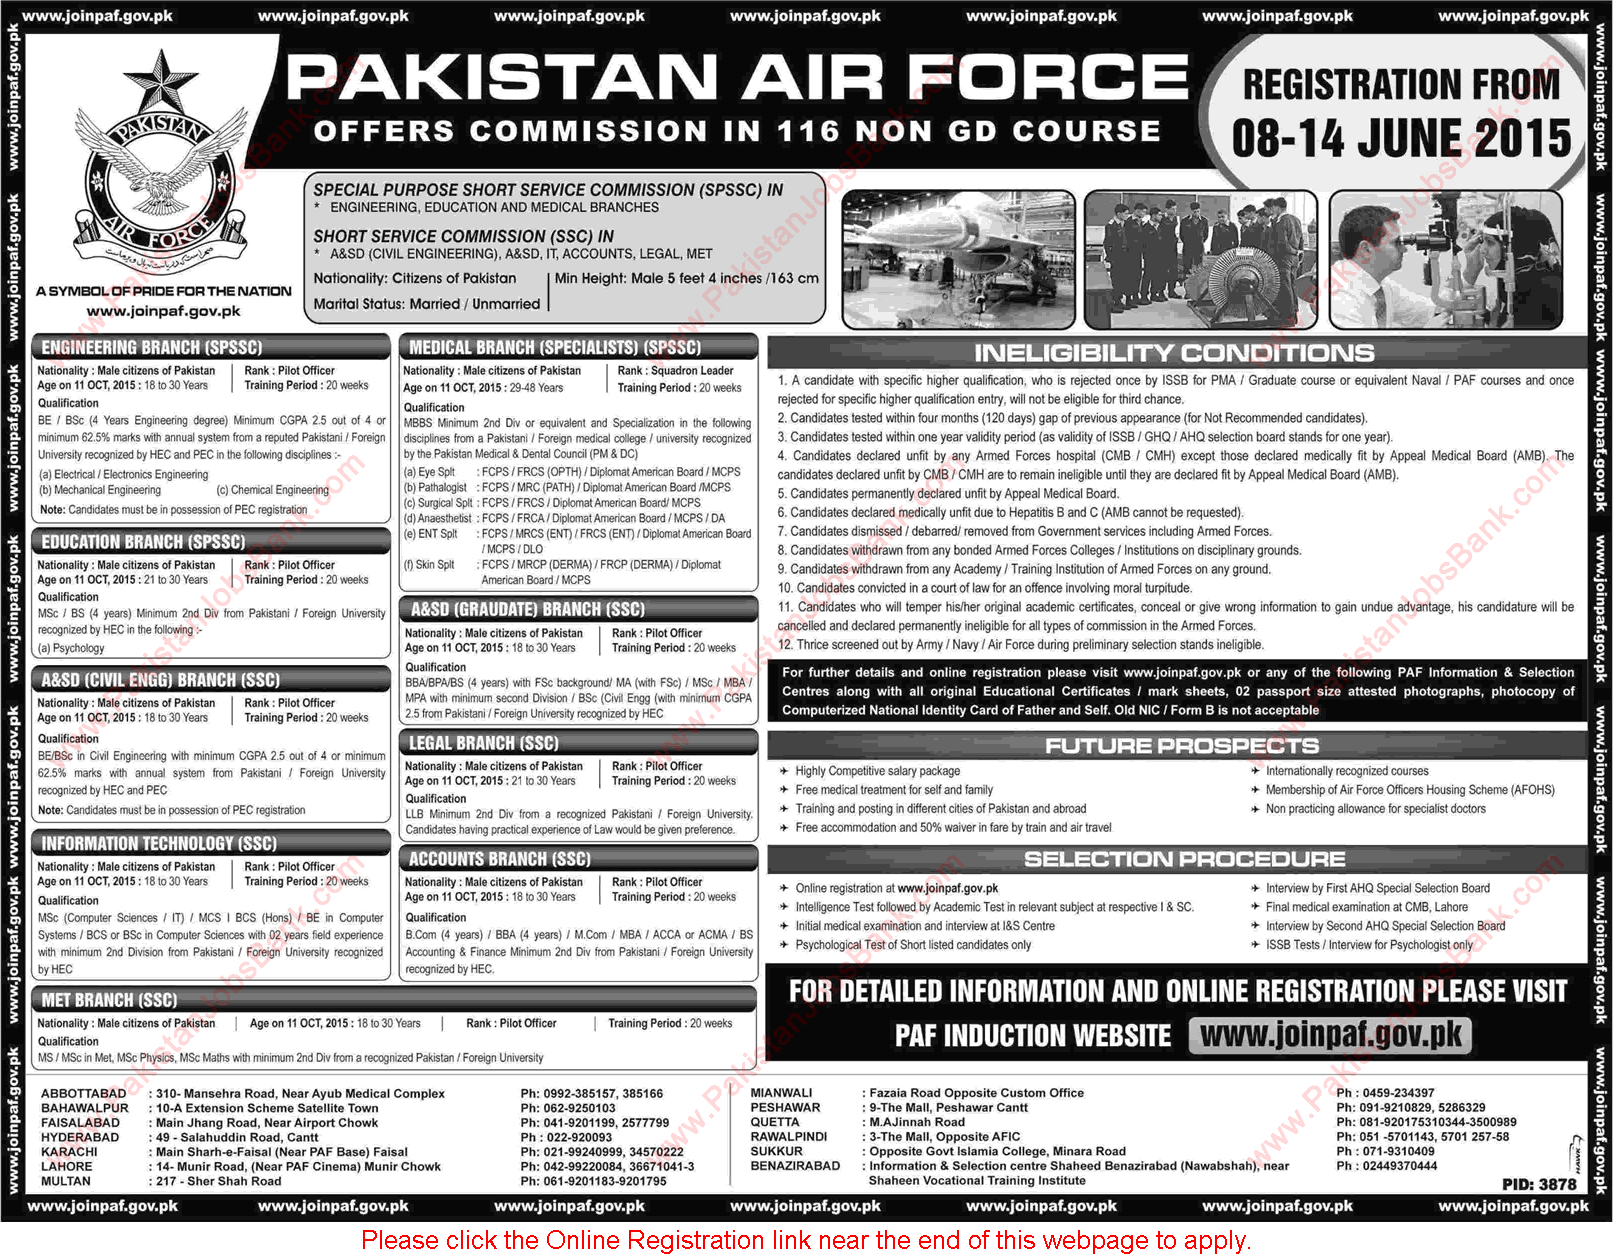 Join Pakistan Air Force June 2015 PAF Commission in 116 Non GD Course Online Registration